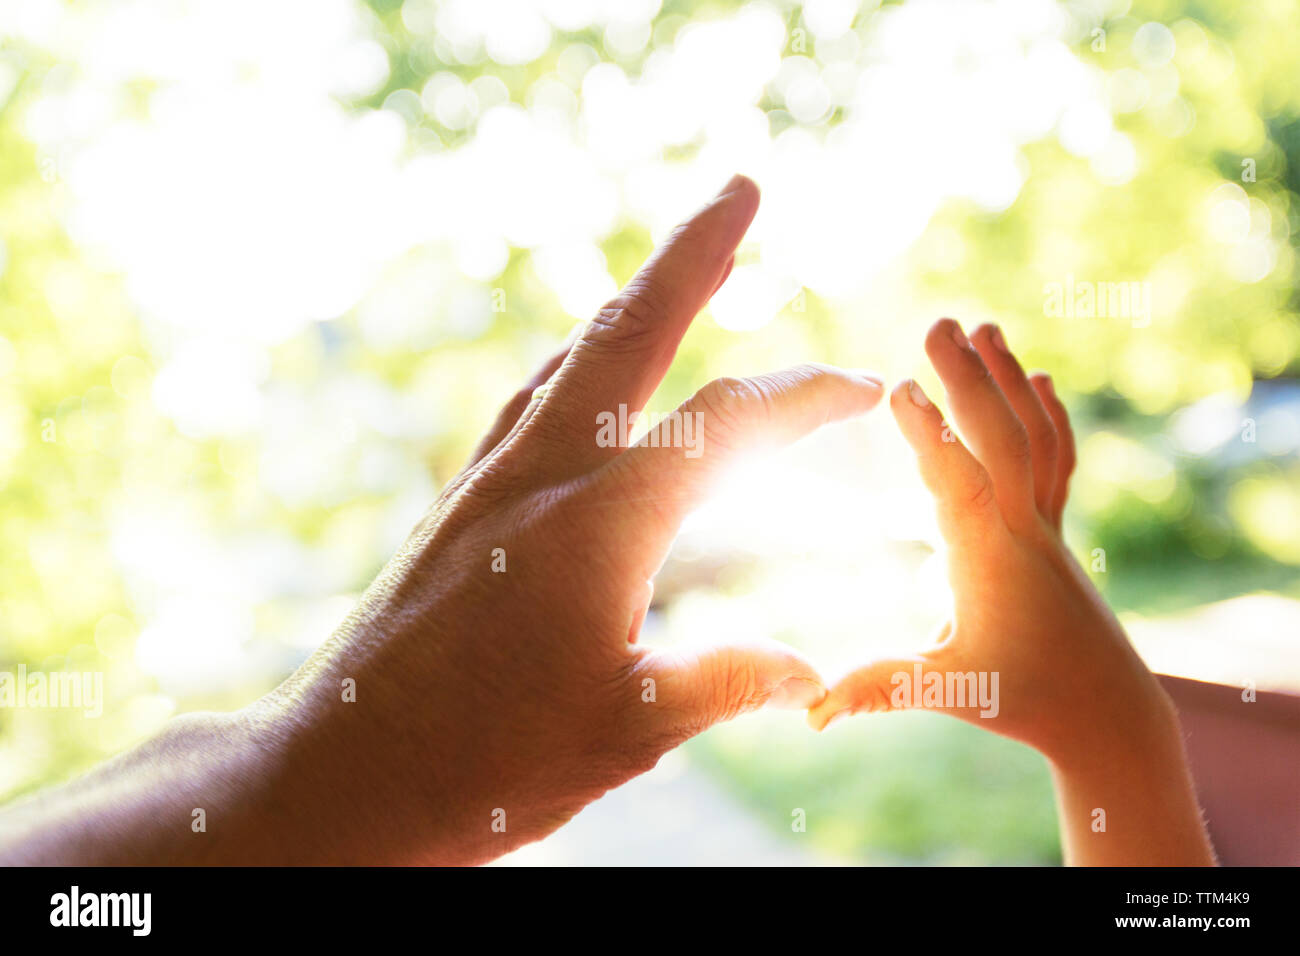 Father and child making touching hands against sunlight Stock Photo